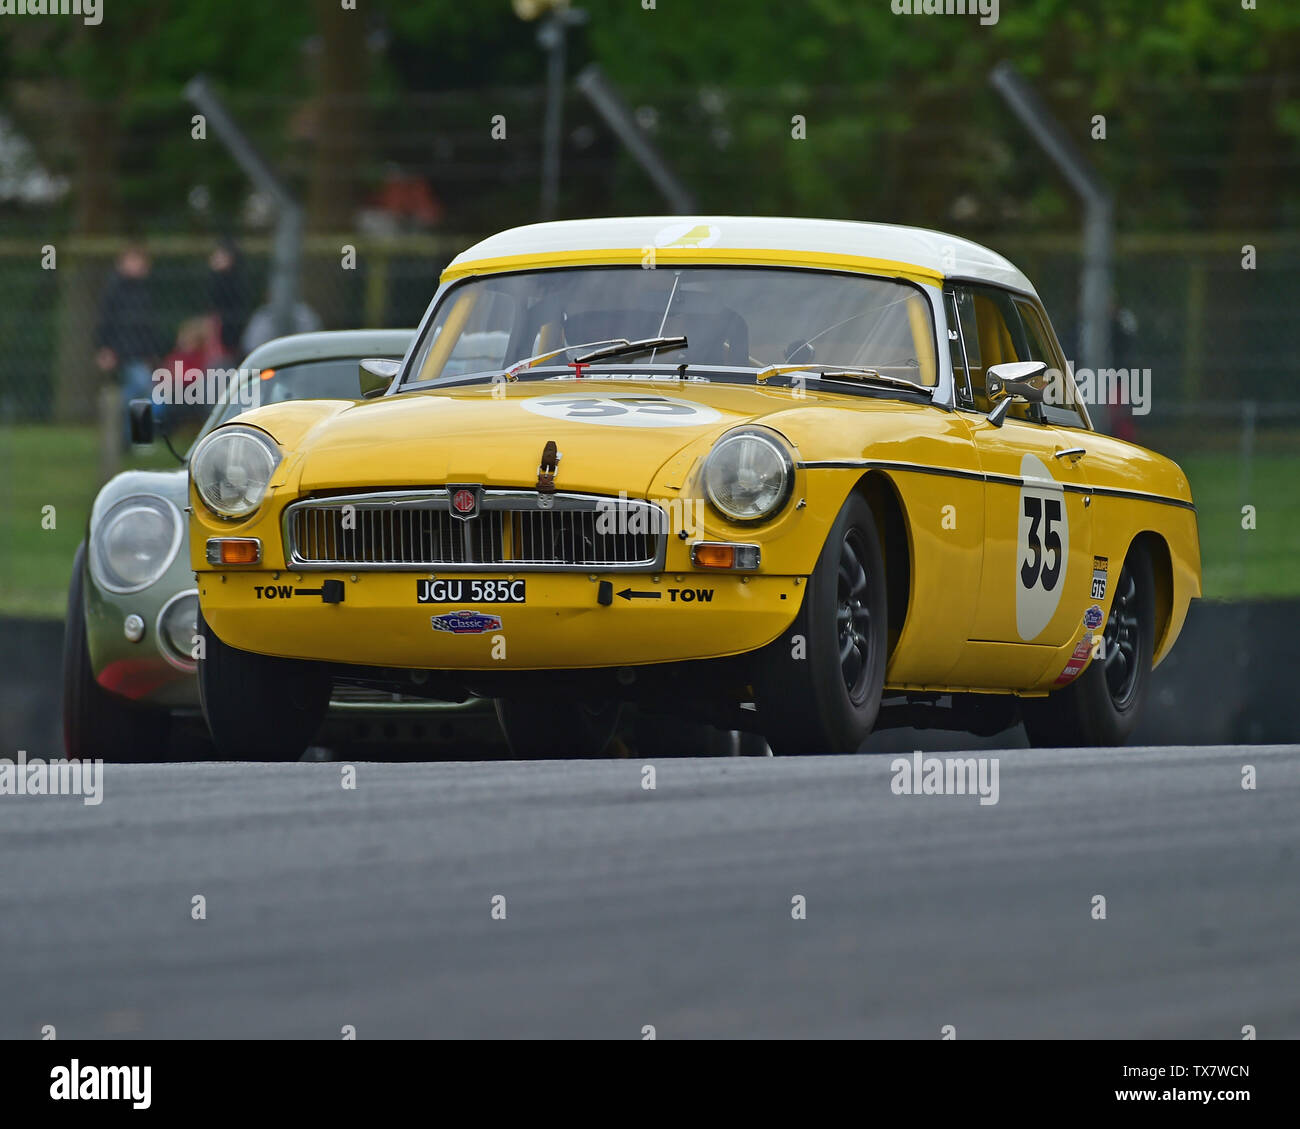 Tim Greenhill, MGB, Equipe GTS, Masters Historic Festival, Brands Hatch, May 2019. Brands Hatch, classic cars, classic event, Classic Racing Cars, FIA Stock Photo